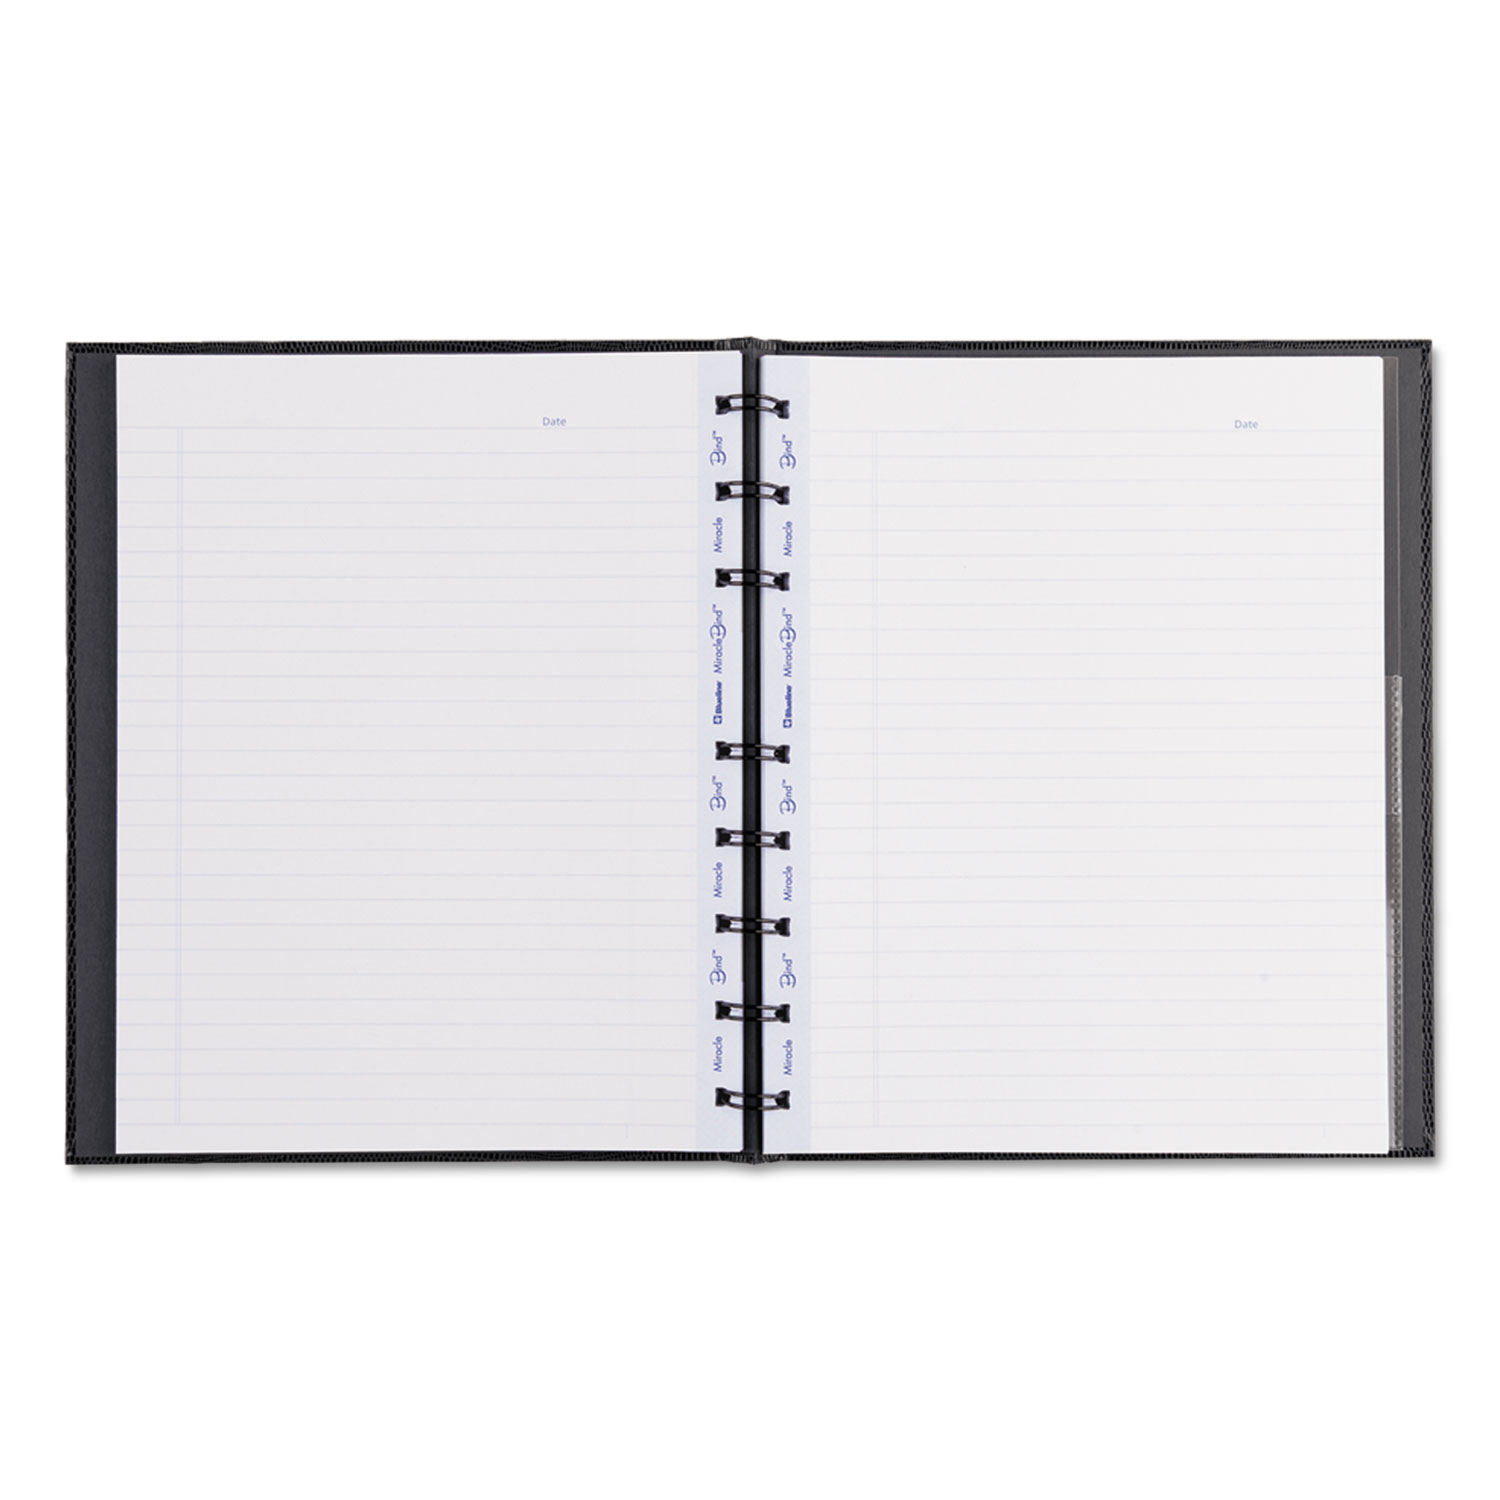  Blueline AF9150.81 MiracleBind Notebook, 1 Subject, Medium/College Rule, Black Cover, 9.25 x 7.25, 75 Sheets (REDAF915081) 